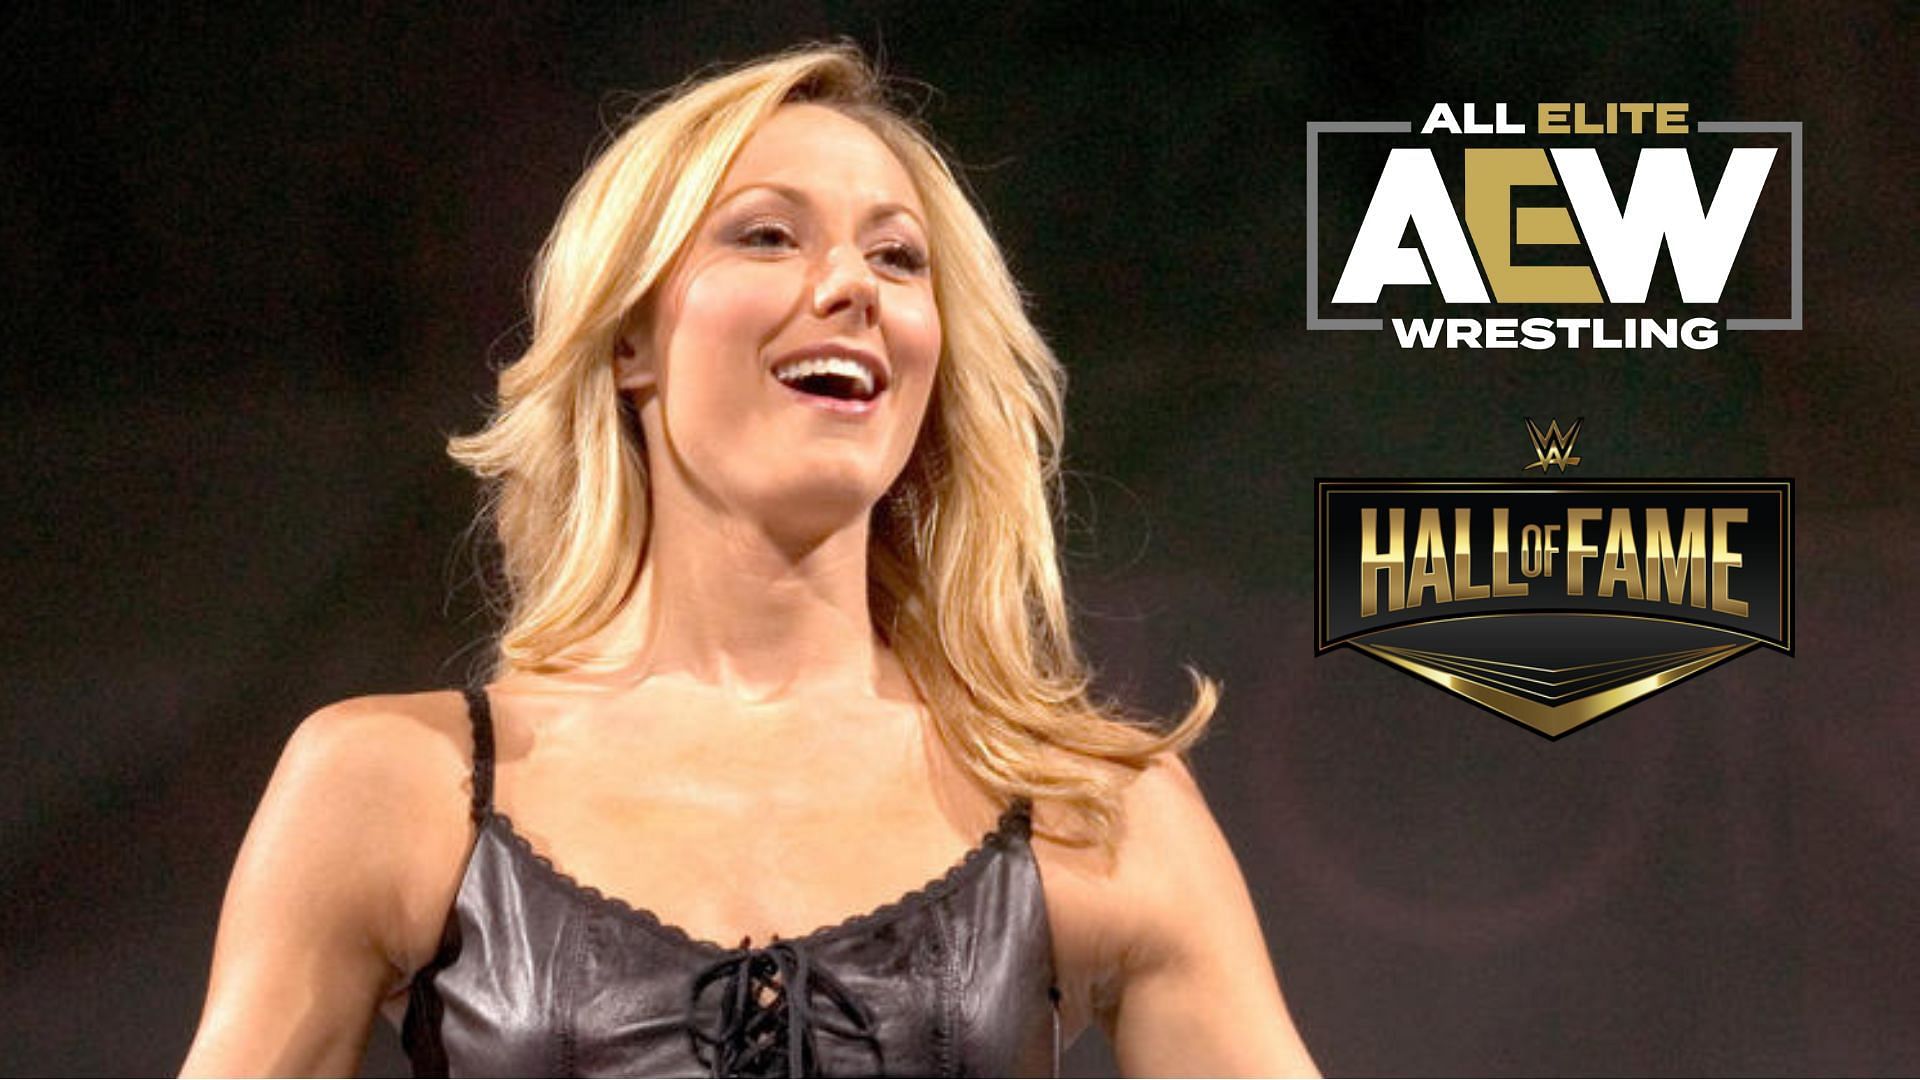 Stacy Keibler will be inducted into the WWE Hall of Fame this weekend.